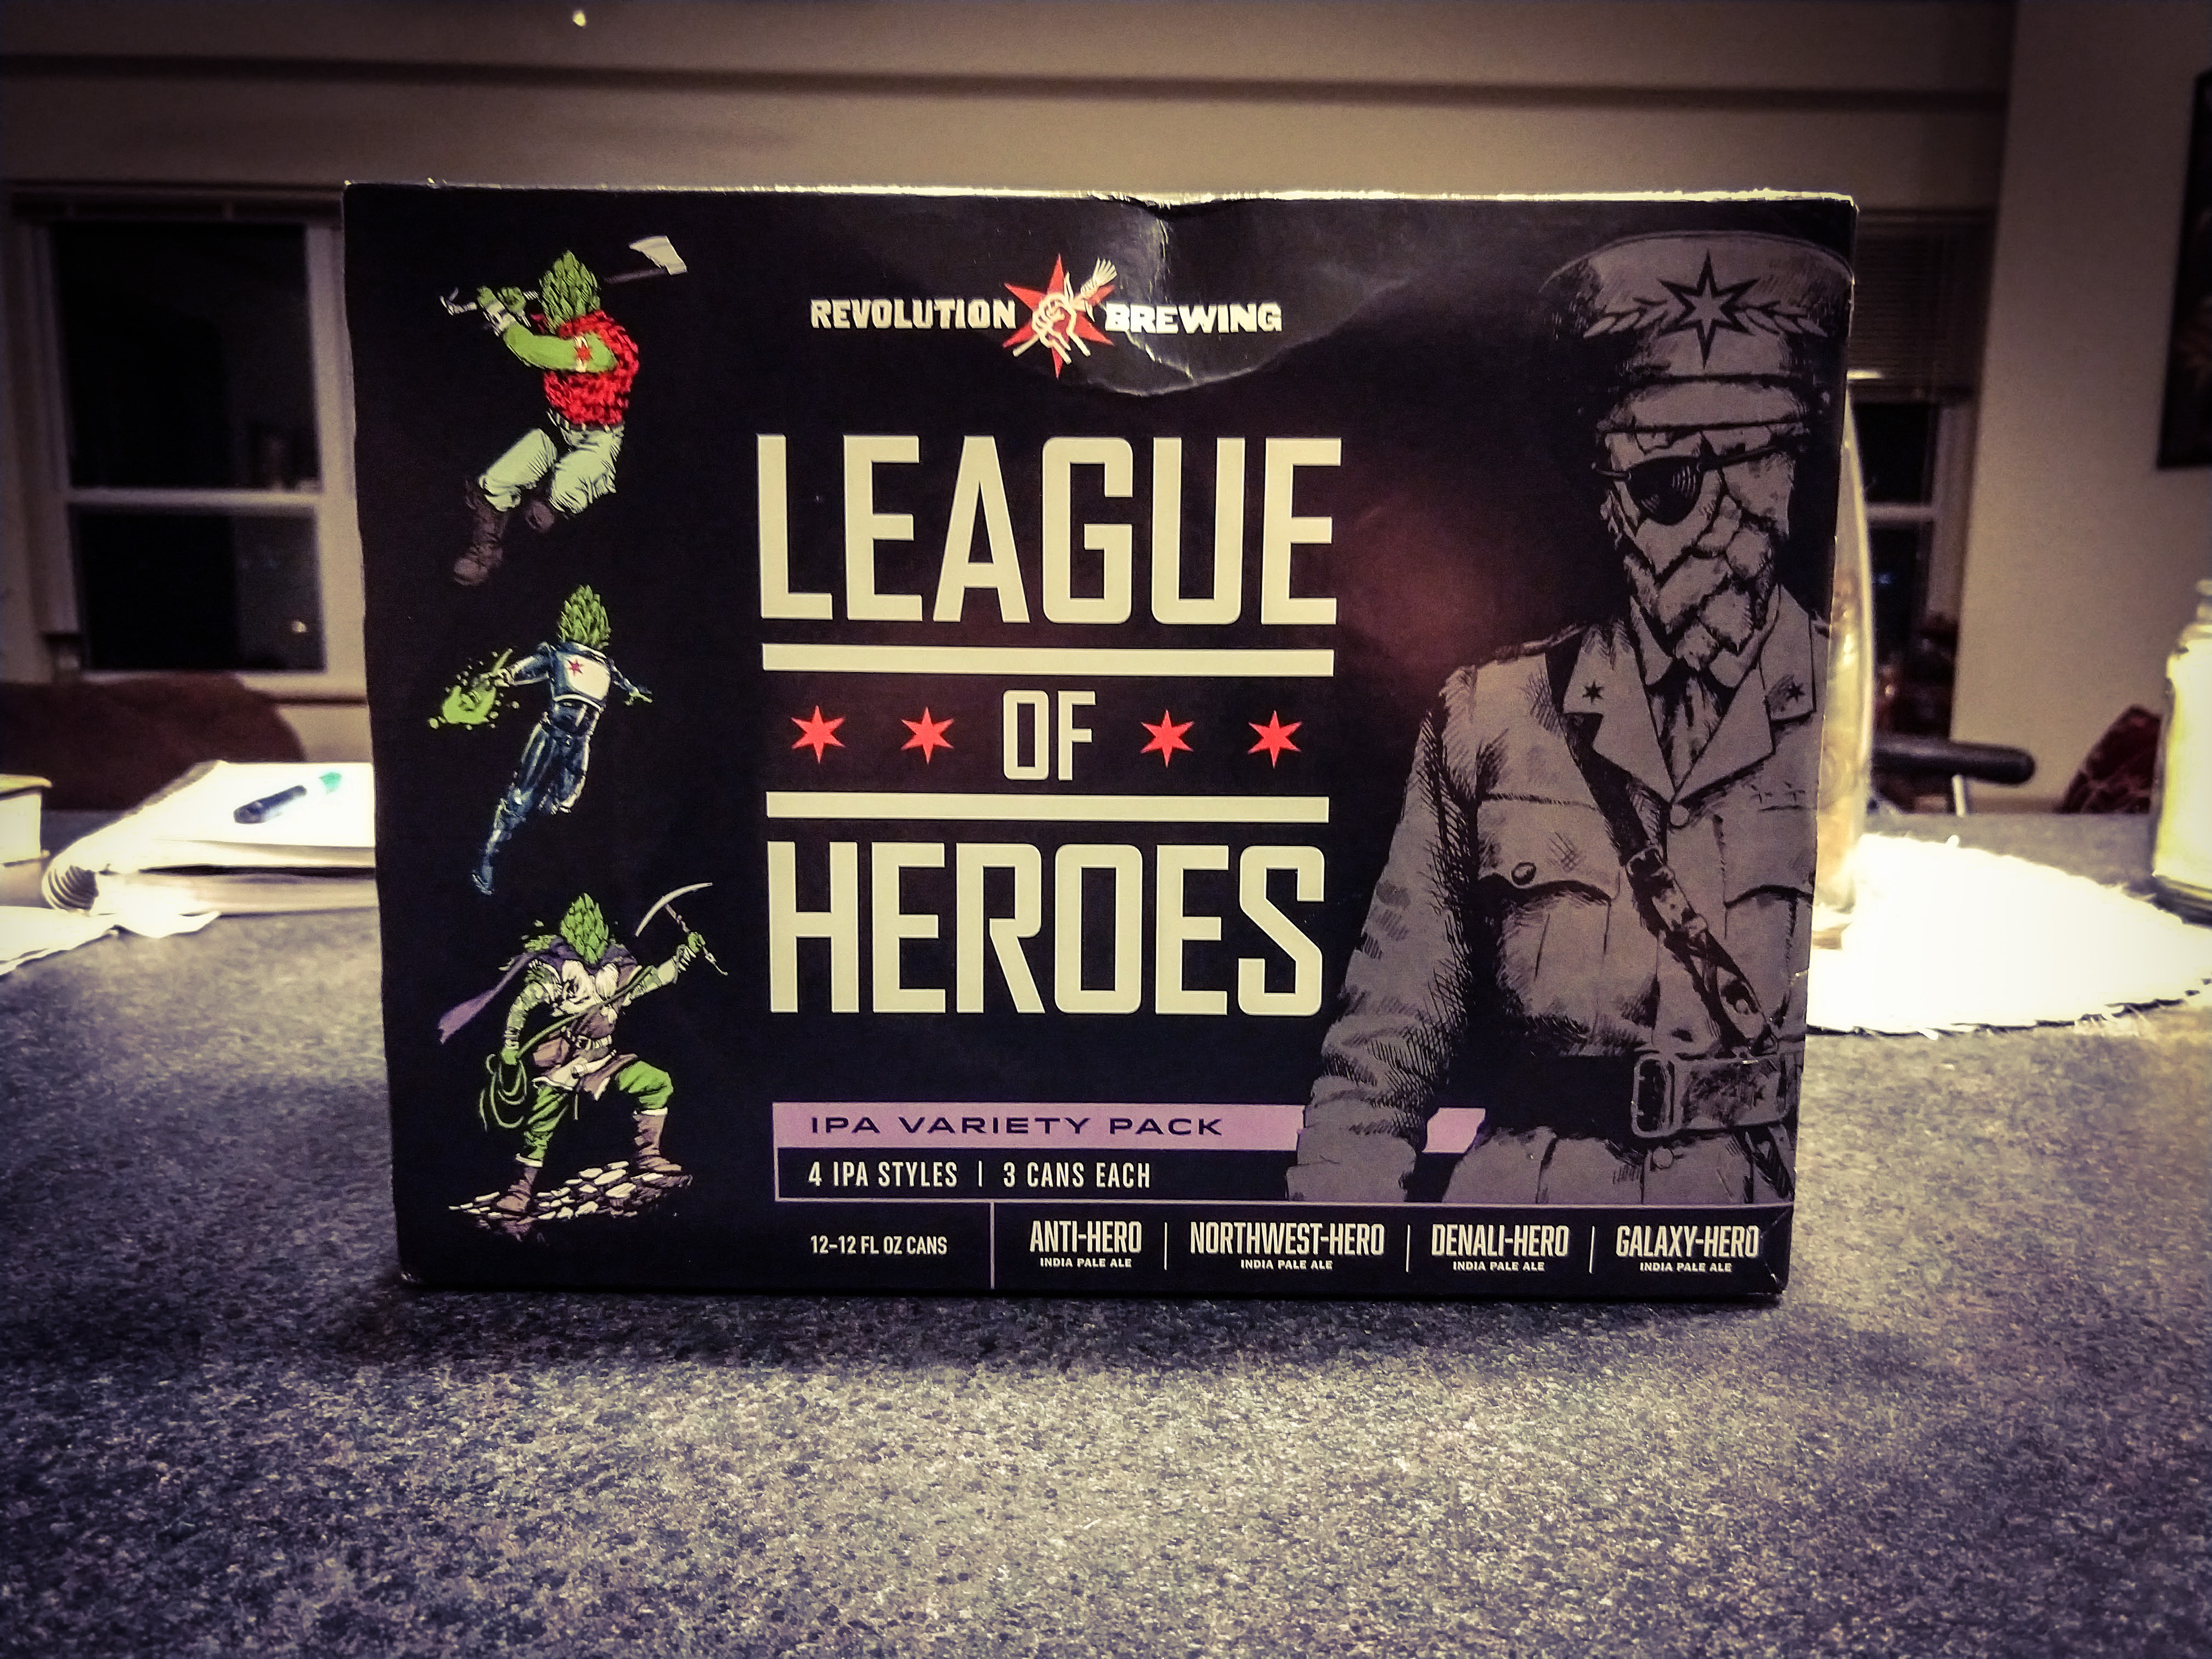 League of Heroes Volume 3 From Revolution Brewing